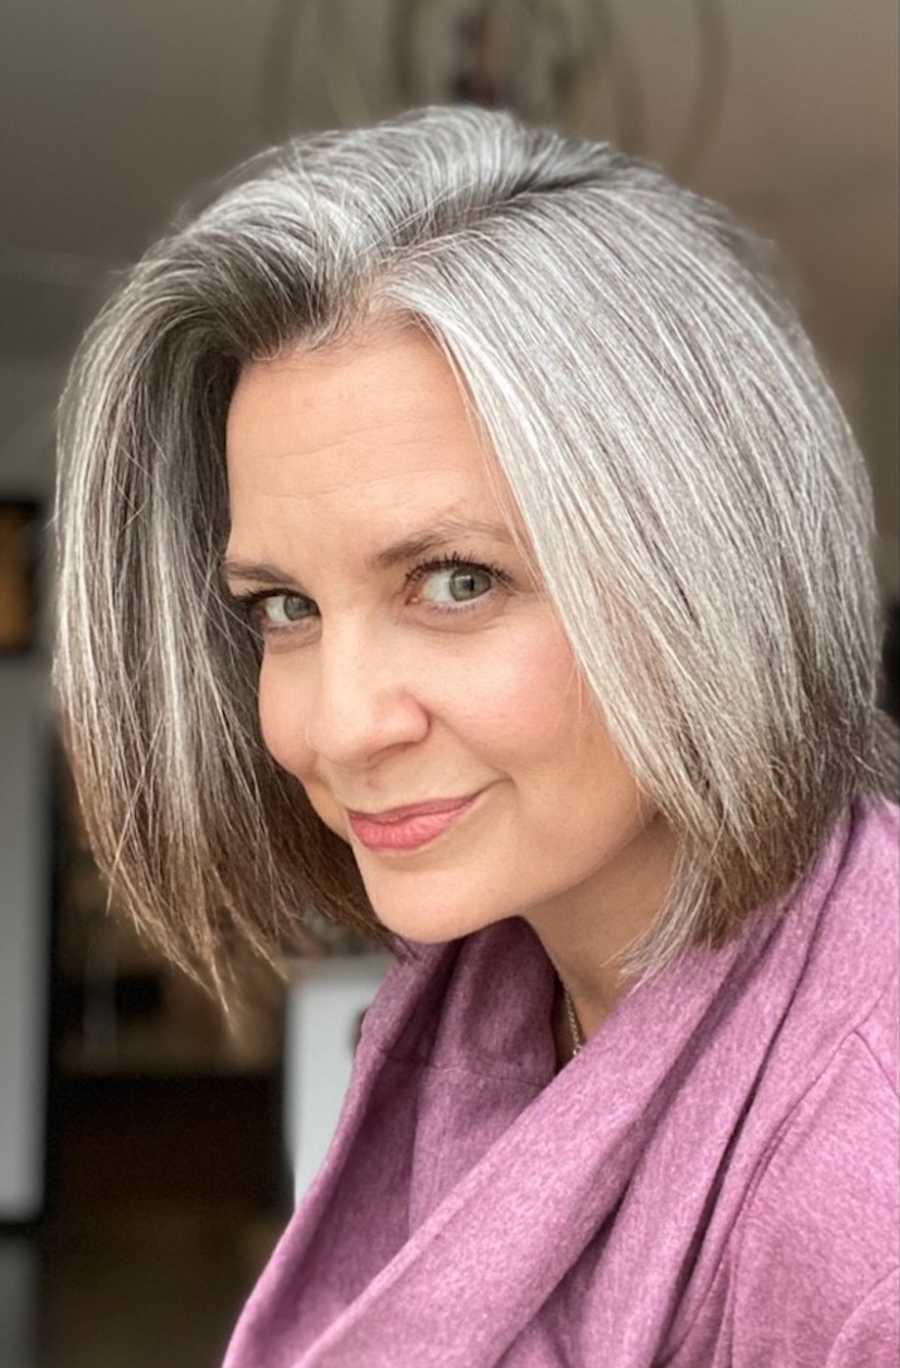 Mom! You have gray hair!' I'd pluck them. I believed my best days had  passed and felt rooted in shame.': Woman goes on self-love journey, 'My  beauty is more than my hair' –